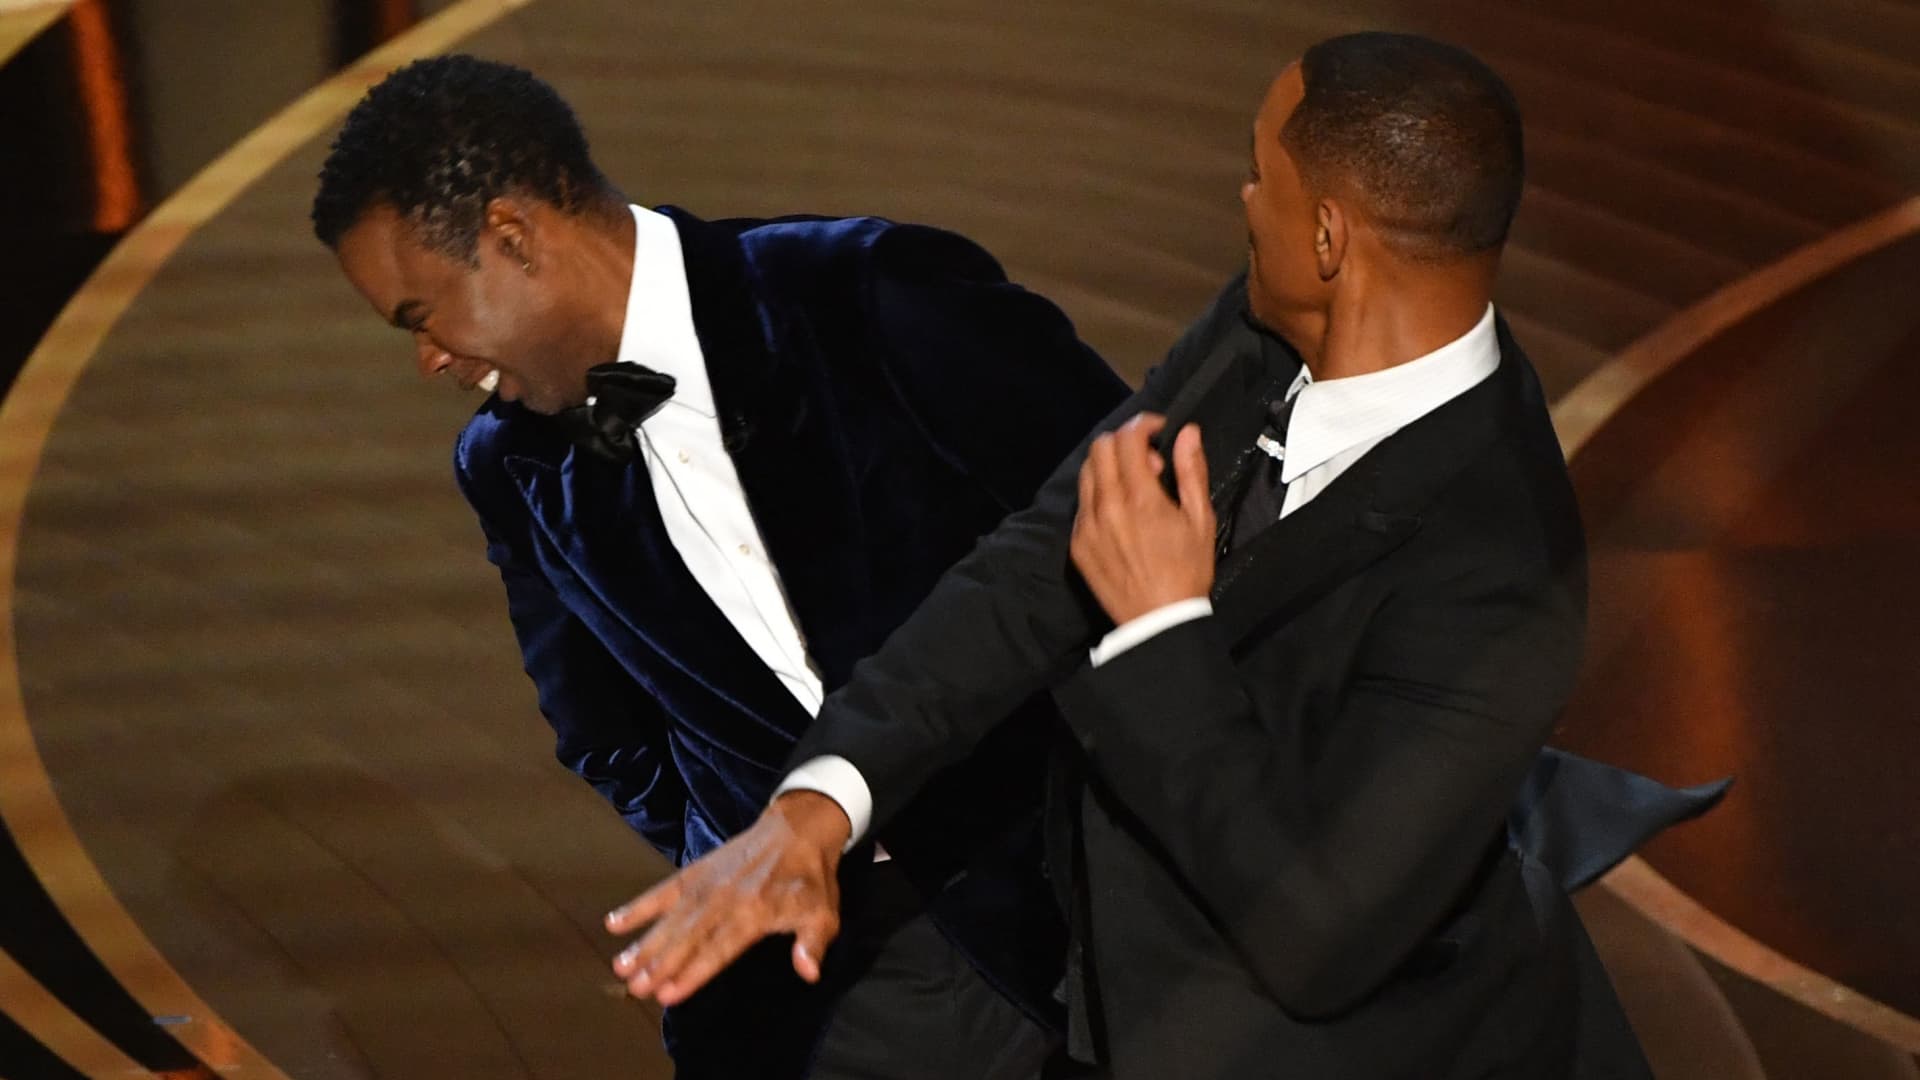 Will Smith apologizes to Chris Rock for slapping him at the Oscars